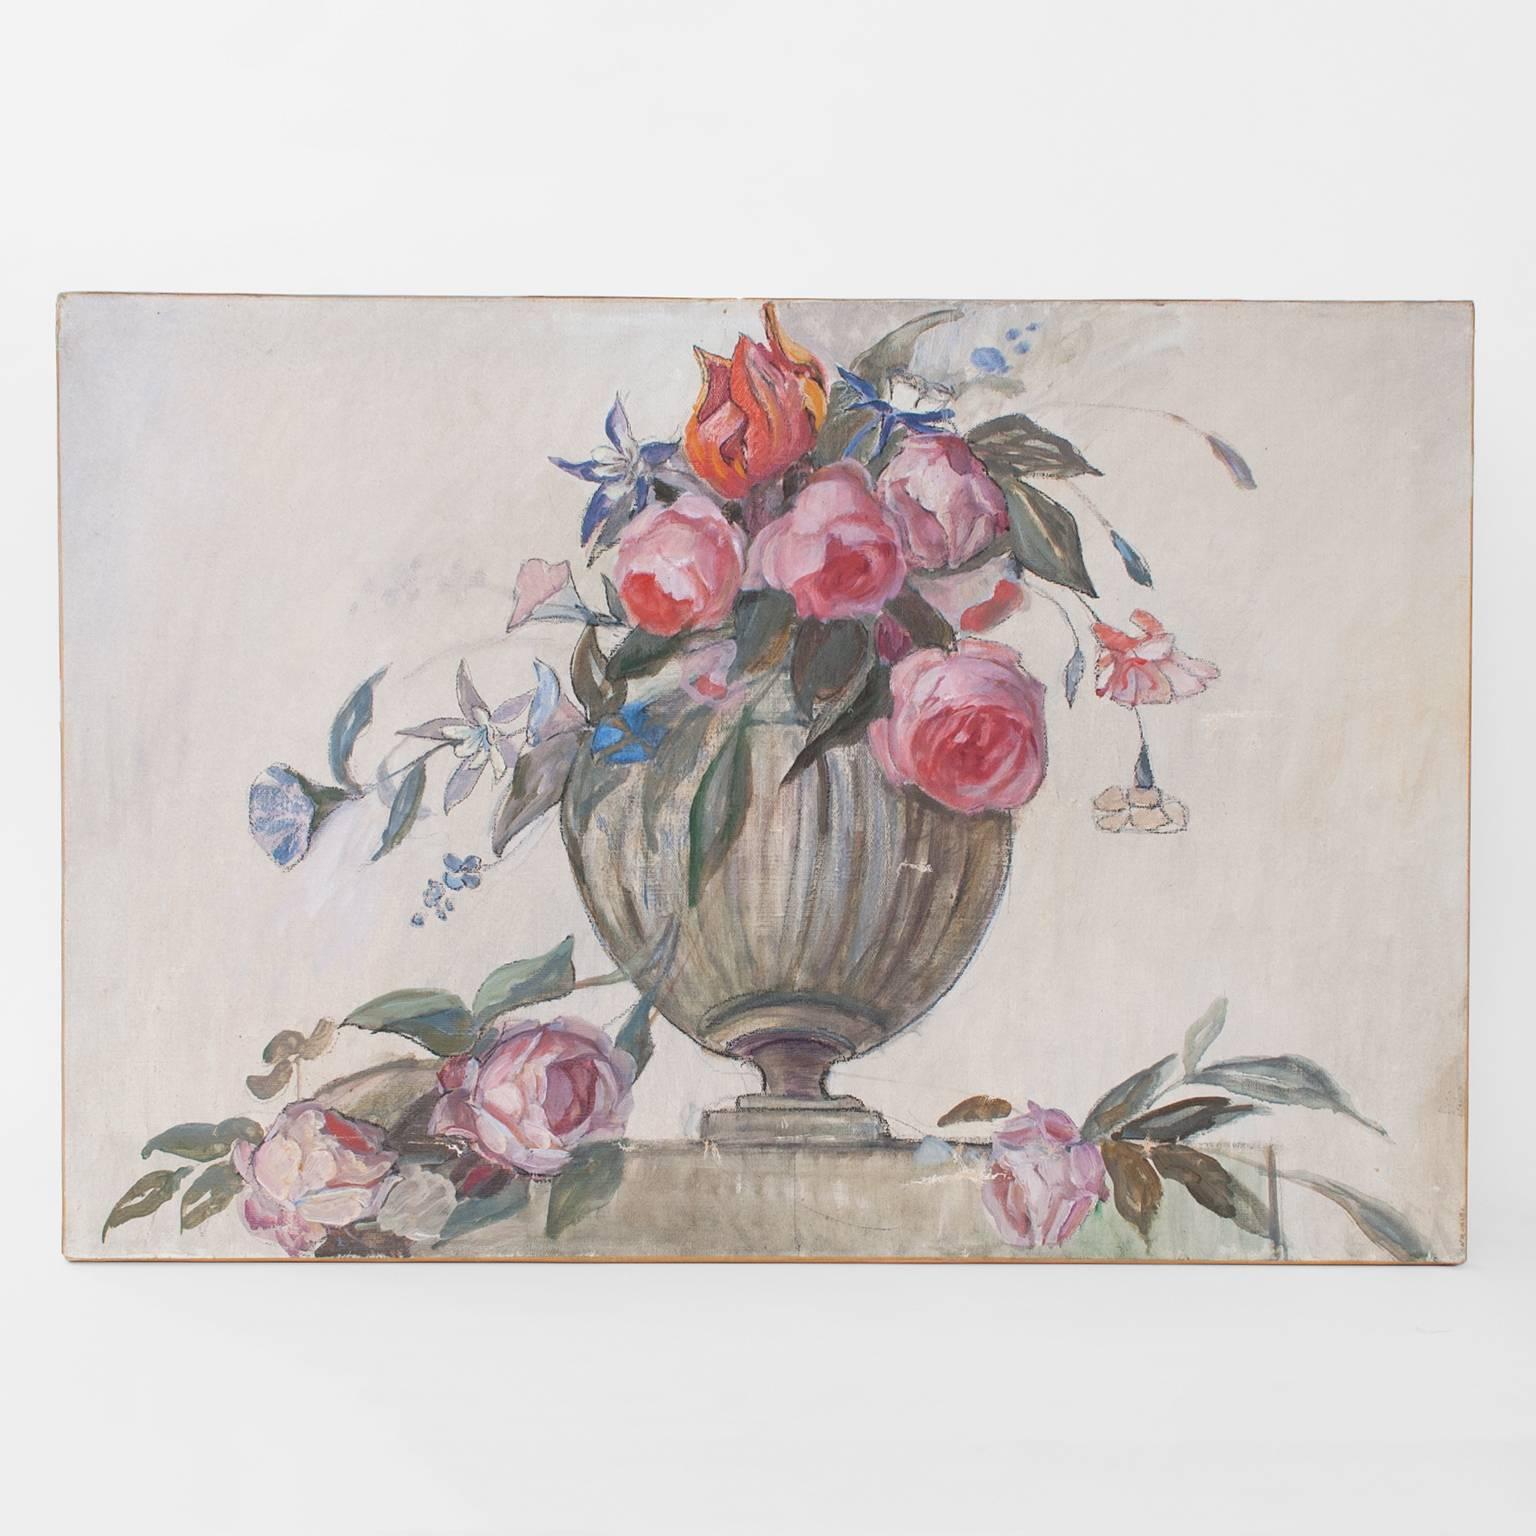 Painting, oil on canvas by Swedish artist Helene Herslow (1875-1944) depicting an urn filled with various flowers as seen from a lower perspective. Unframed in good condition with some scratches to the surface. Painted circa 1920s.
 
Measures: